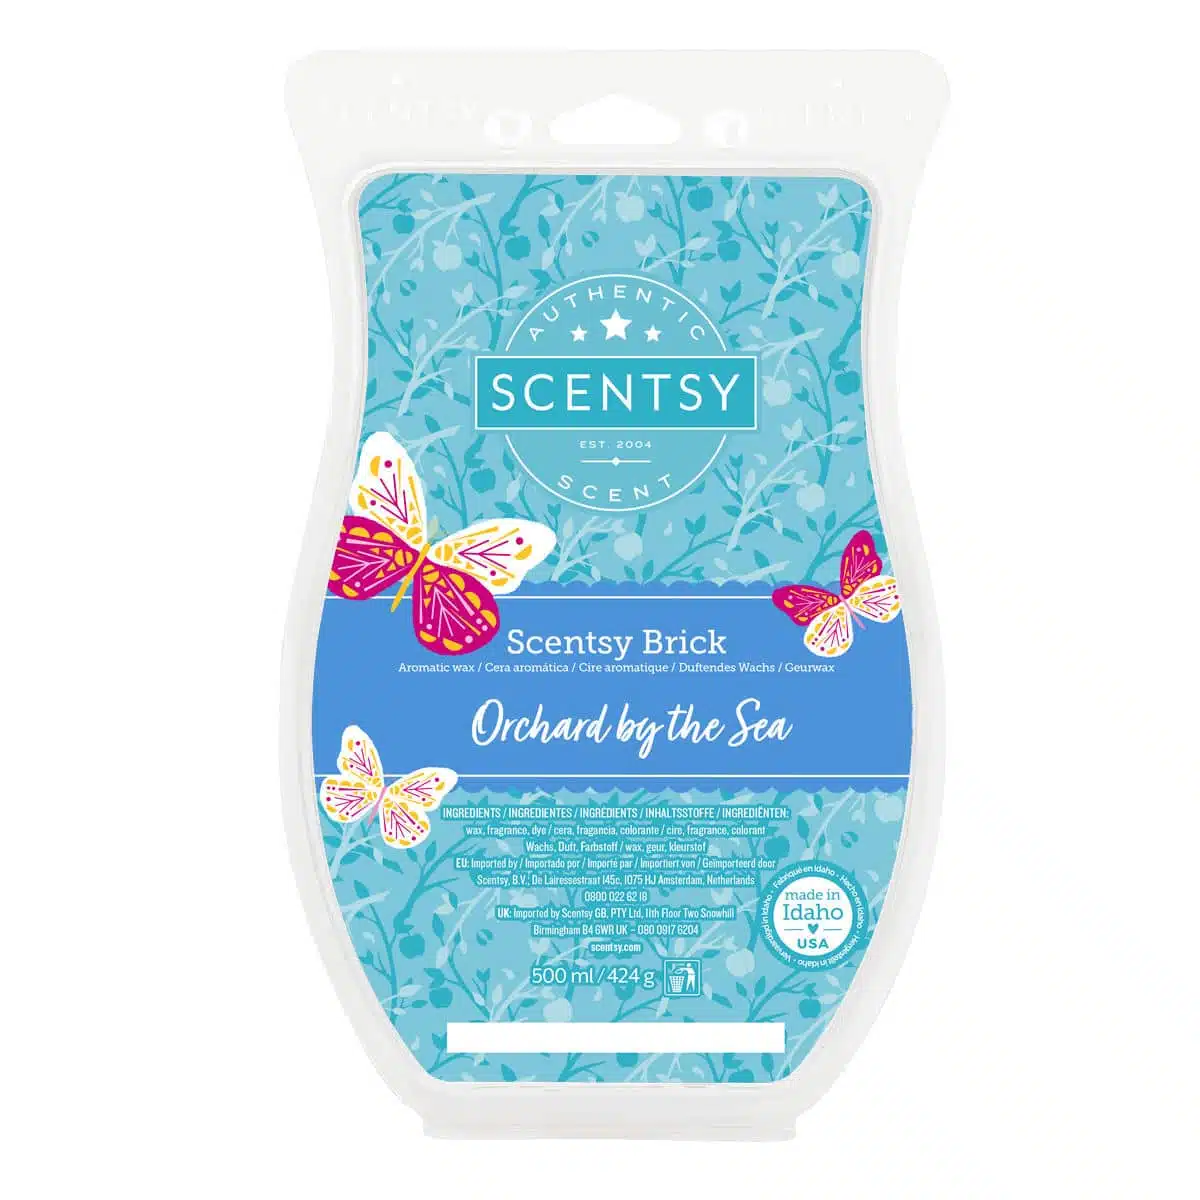 Orchard by the Sea Scentsy Brick - Scentsy Warming Candles